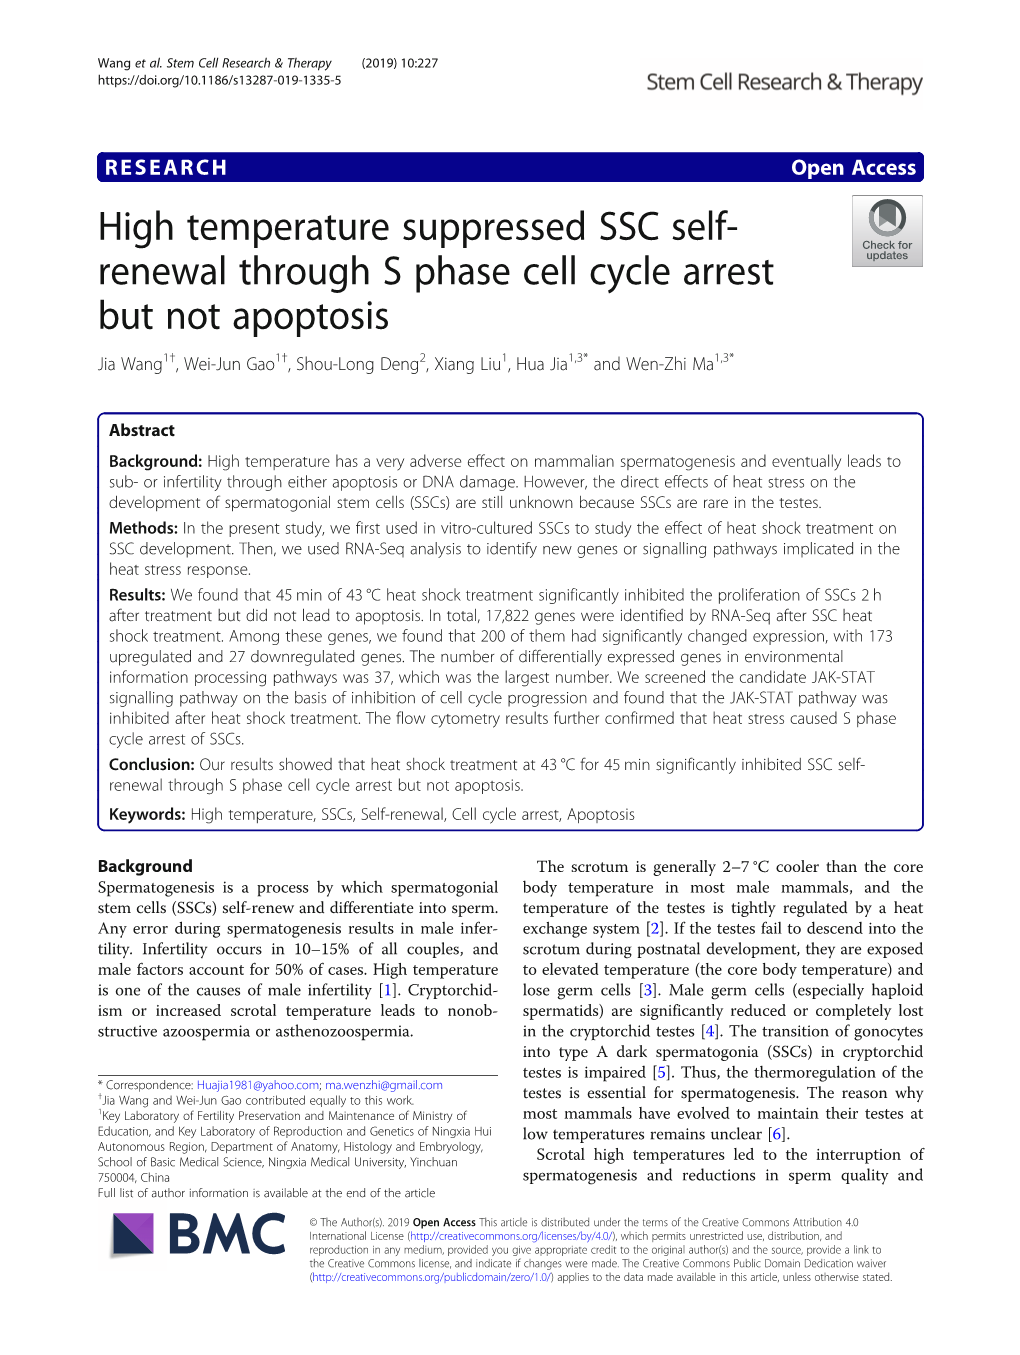 High Temperature Suppressed SSC Self-Renewal Through S Phase Cell Cycle Arrest but Not Apoptosis